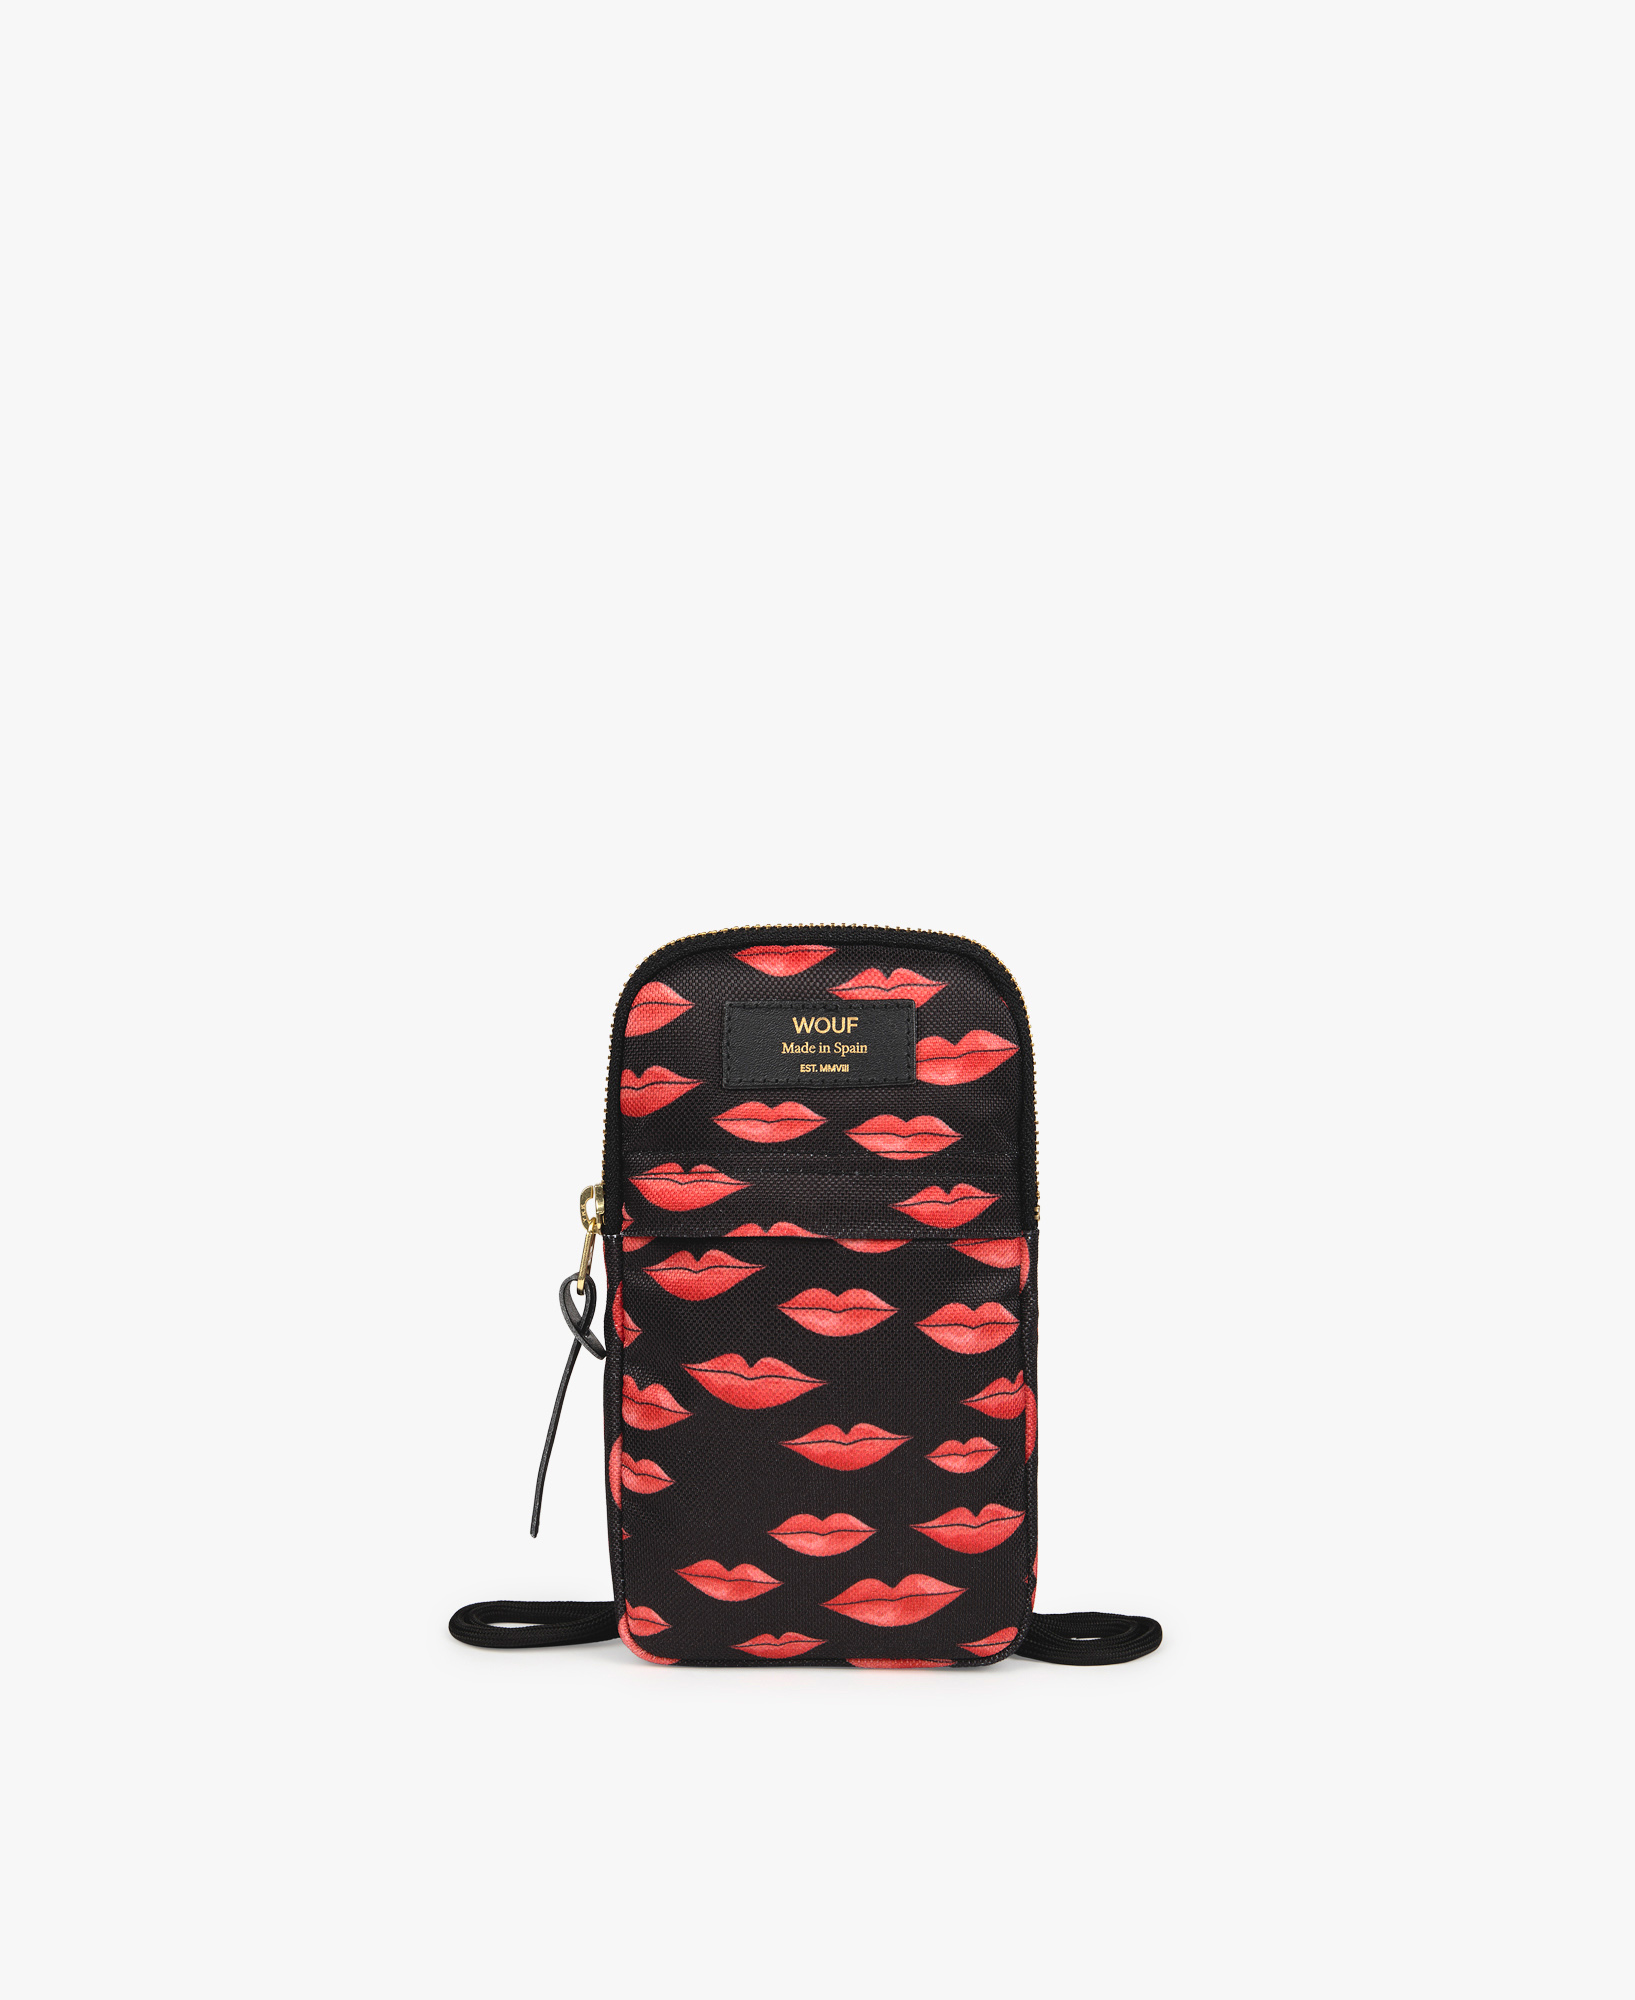 WOUF-Phone-Bag-Beso-Front